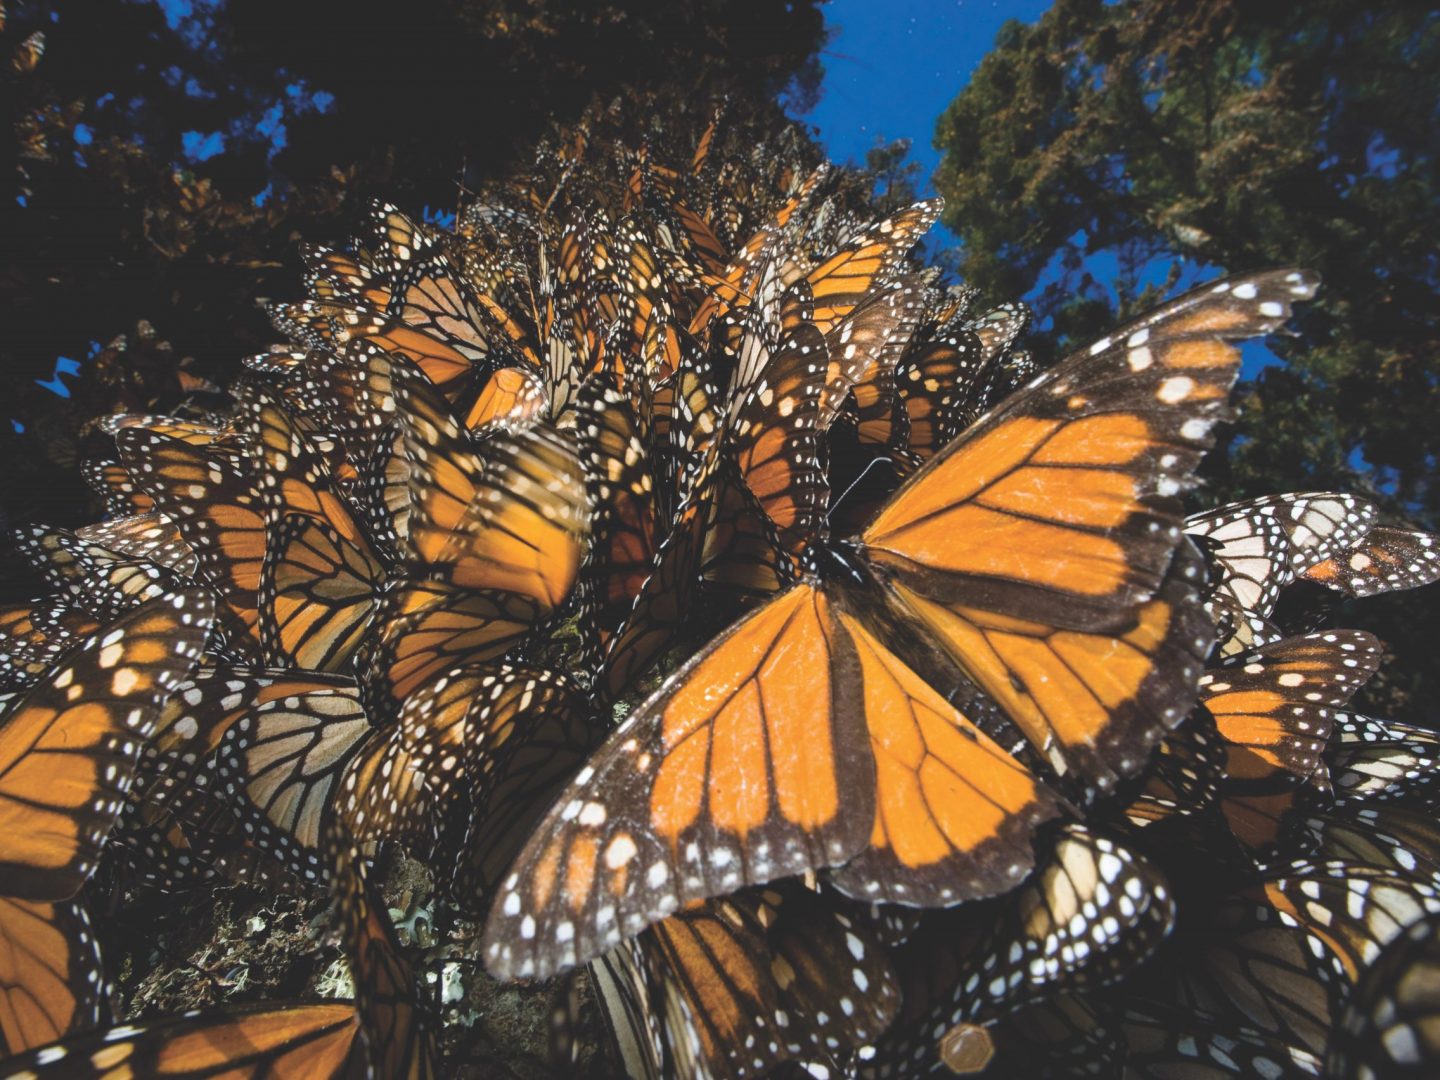 many monarch butterflies at rest